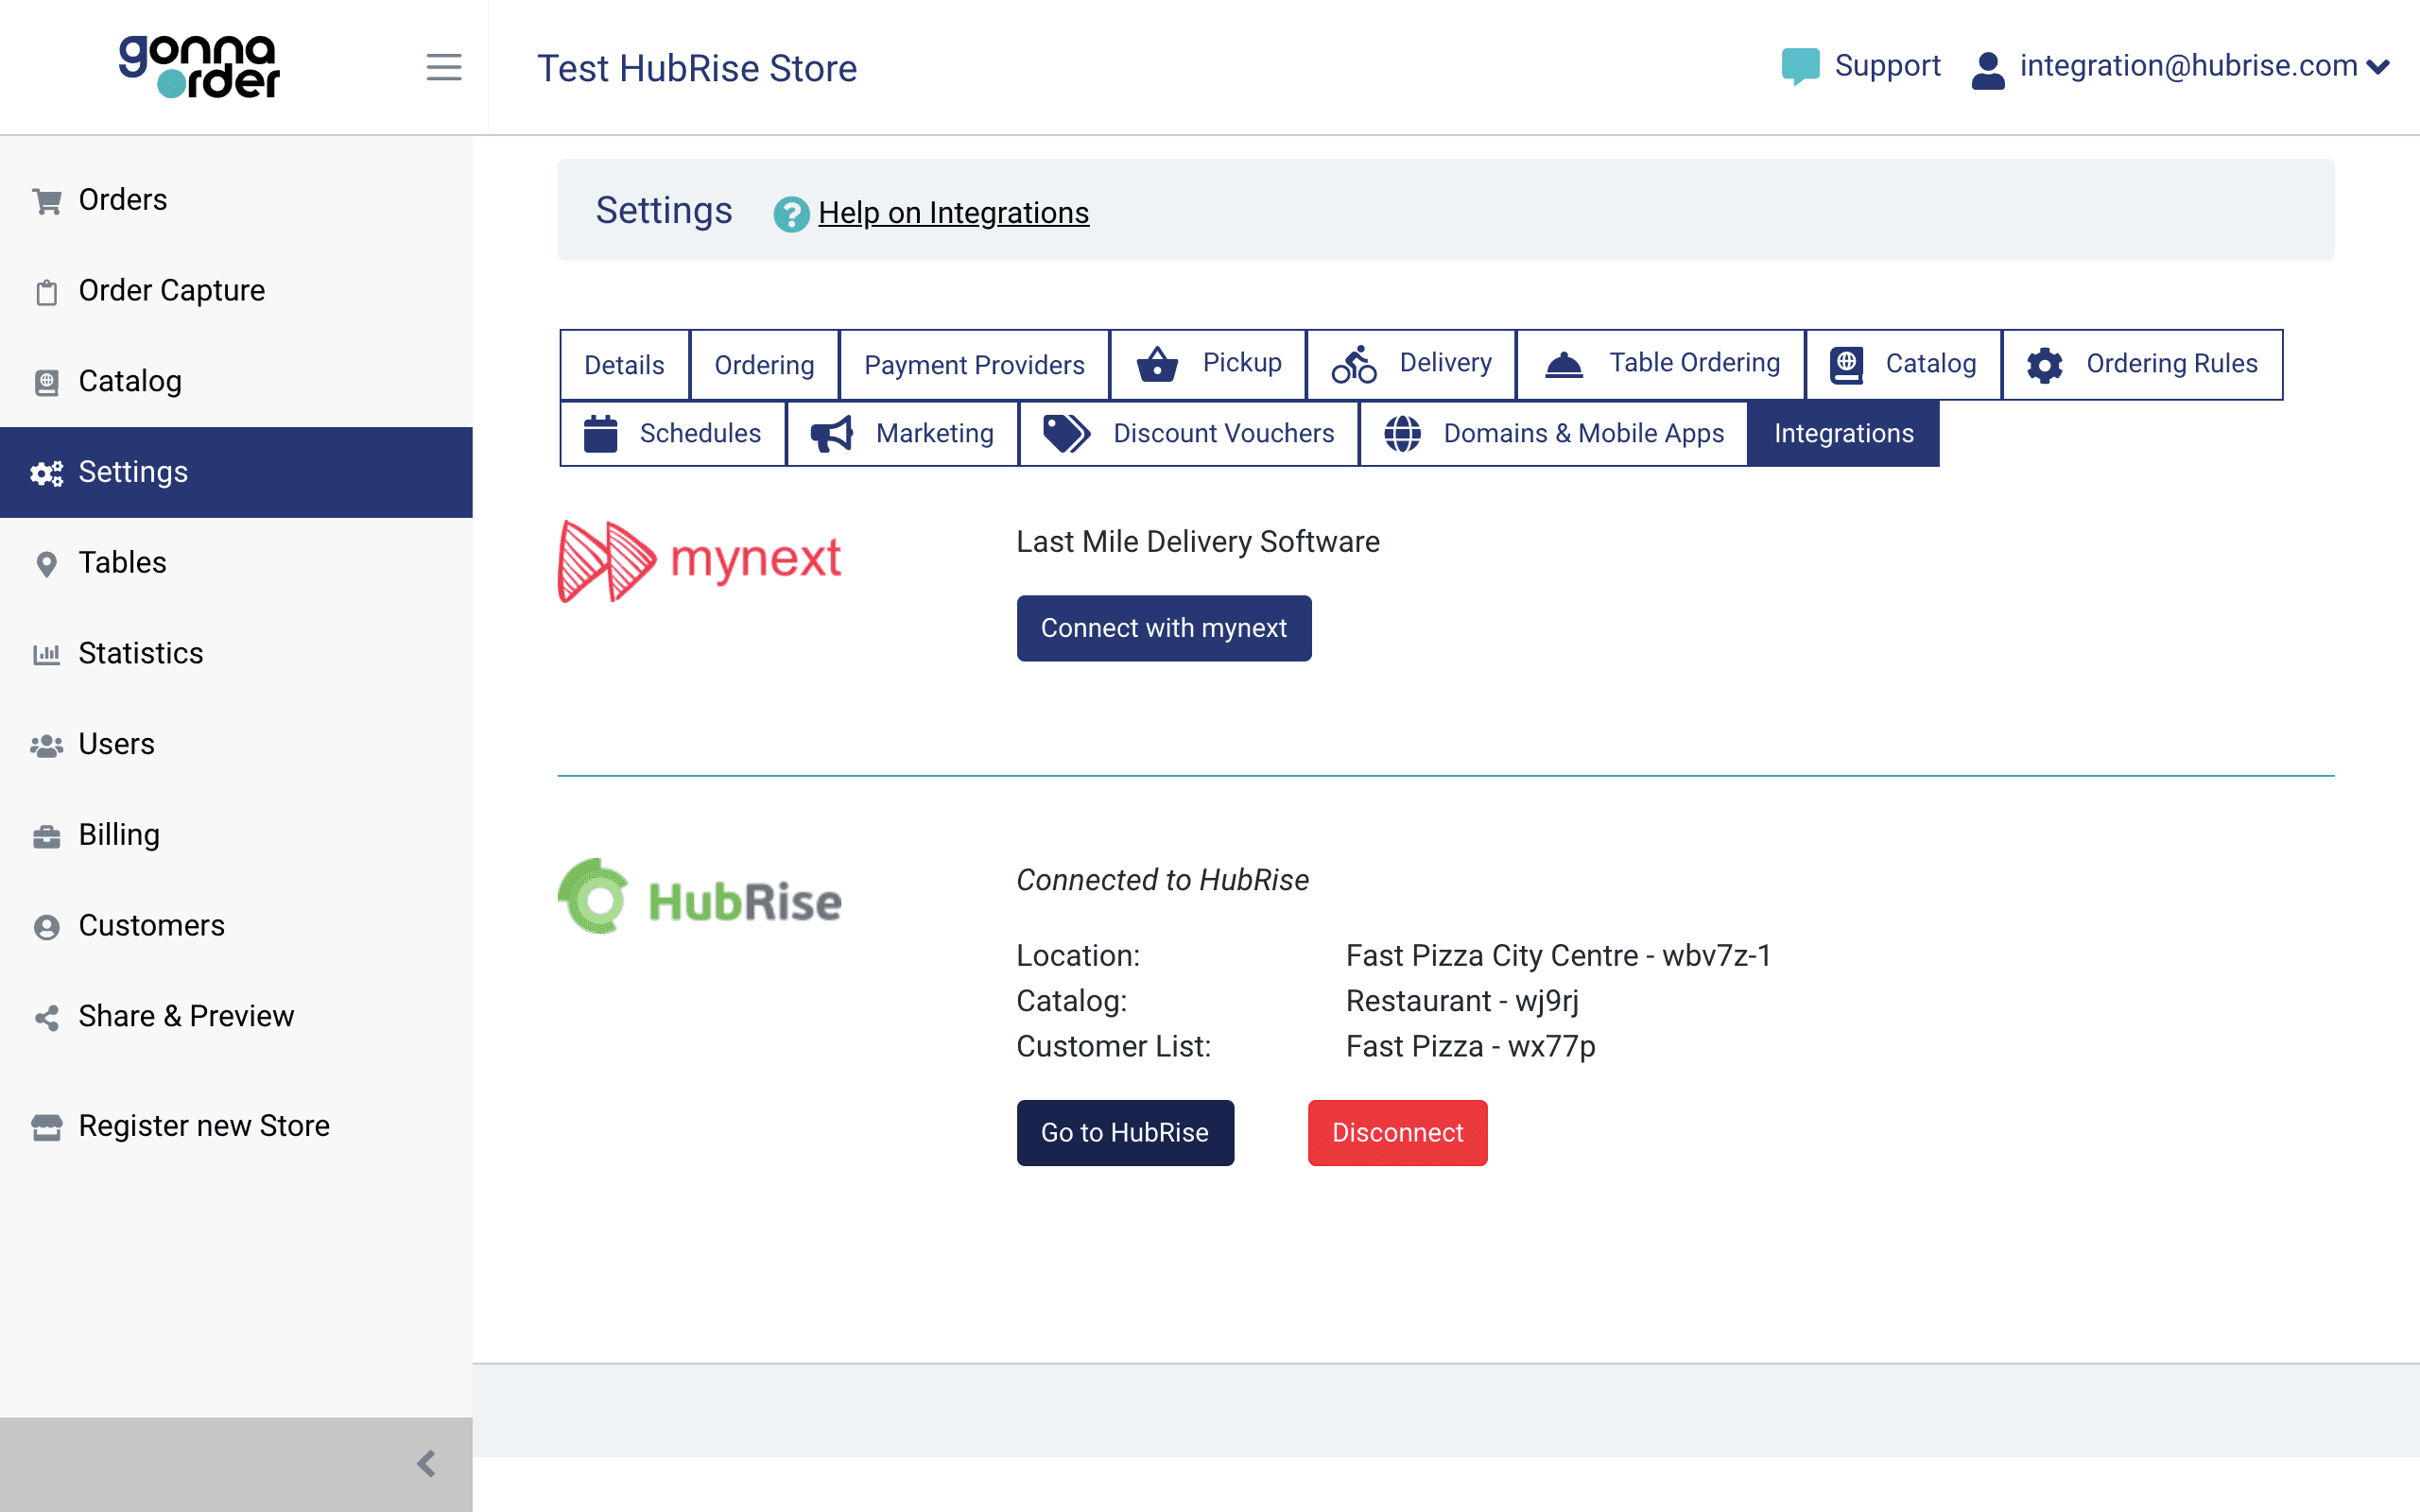 Review the details of your HubRise connection with GonnaOrder